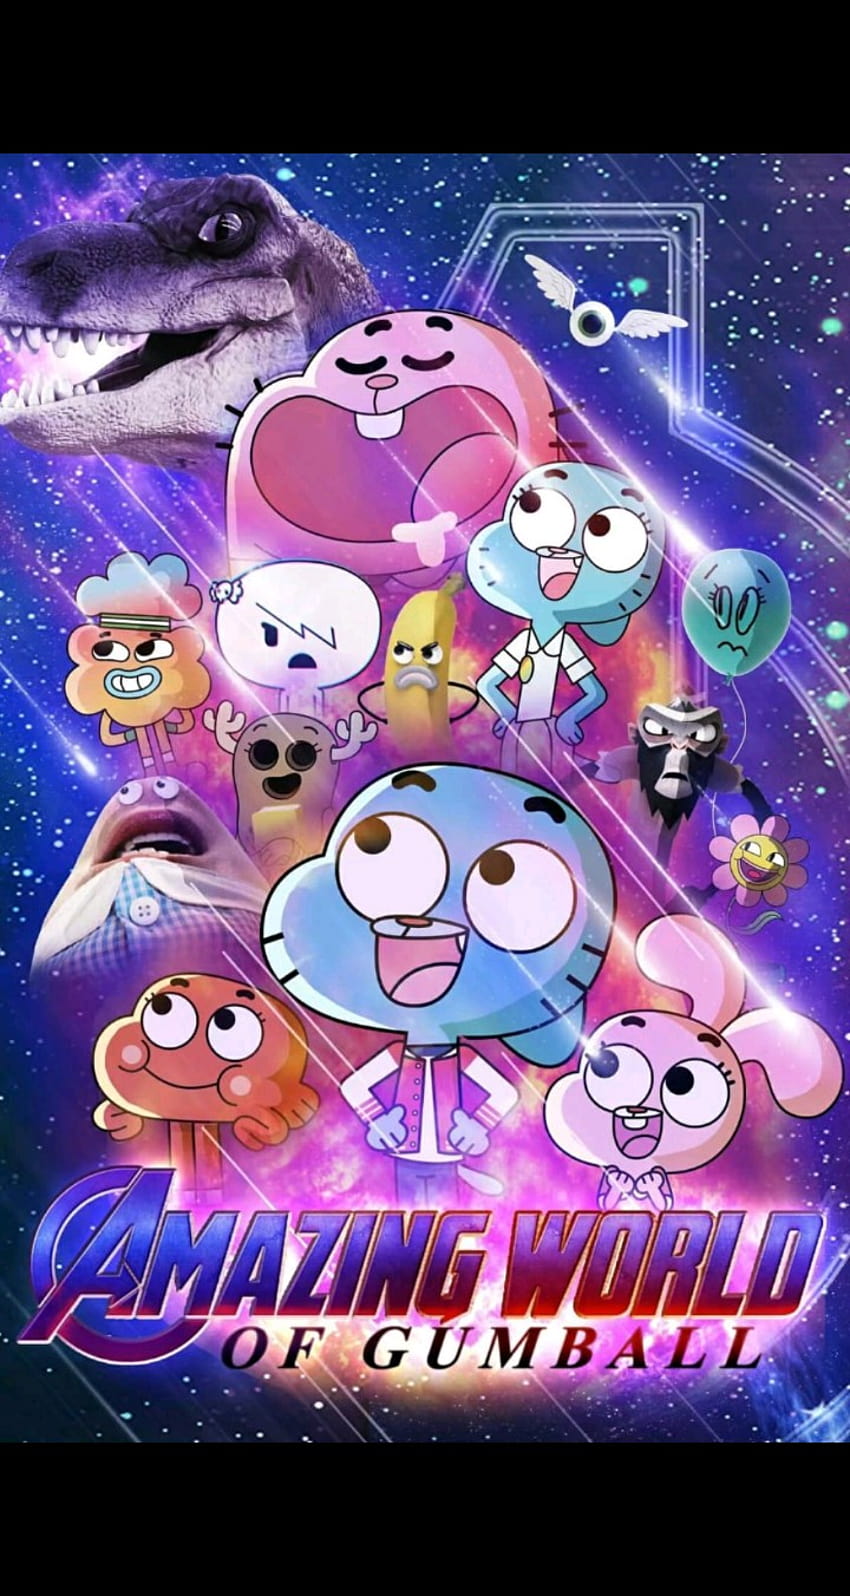 send me some gumball for my phone, tawog HD phone wallpaper